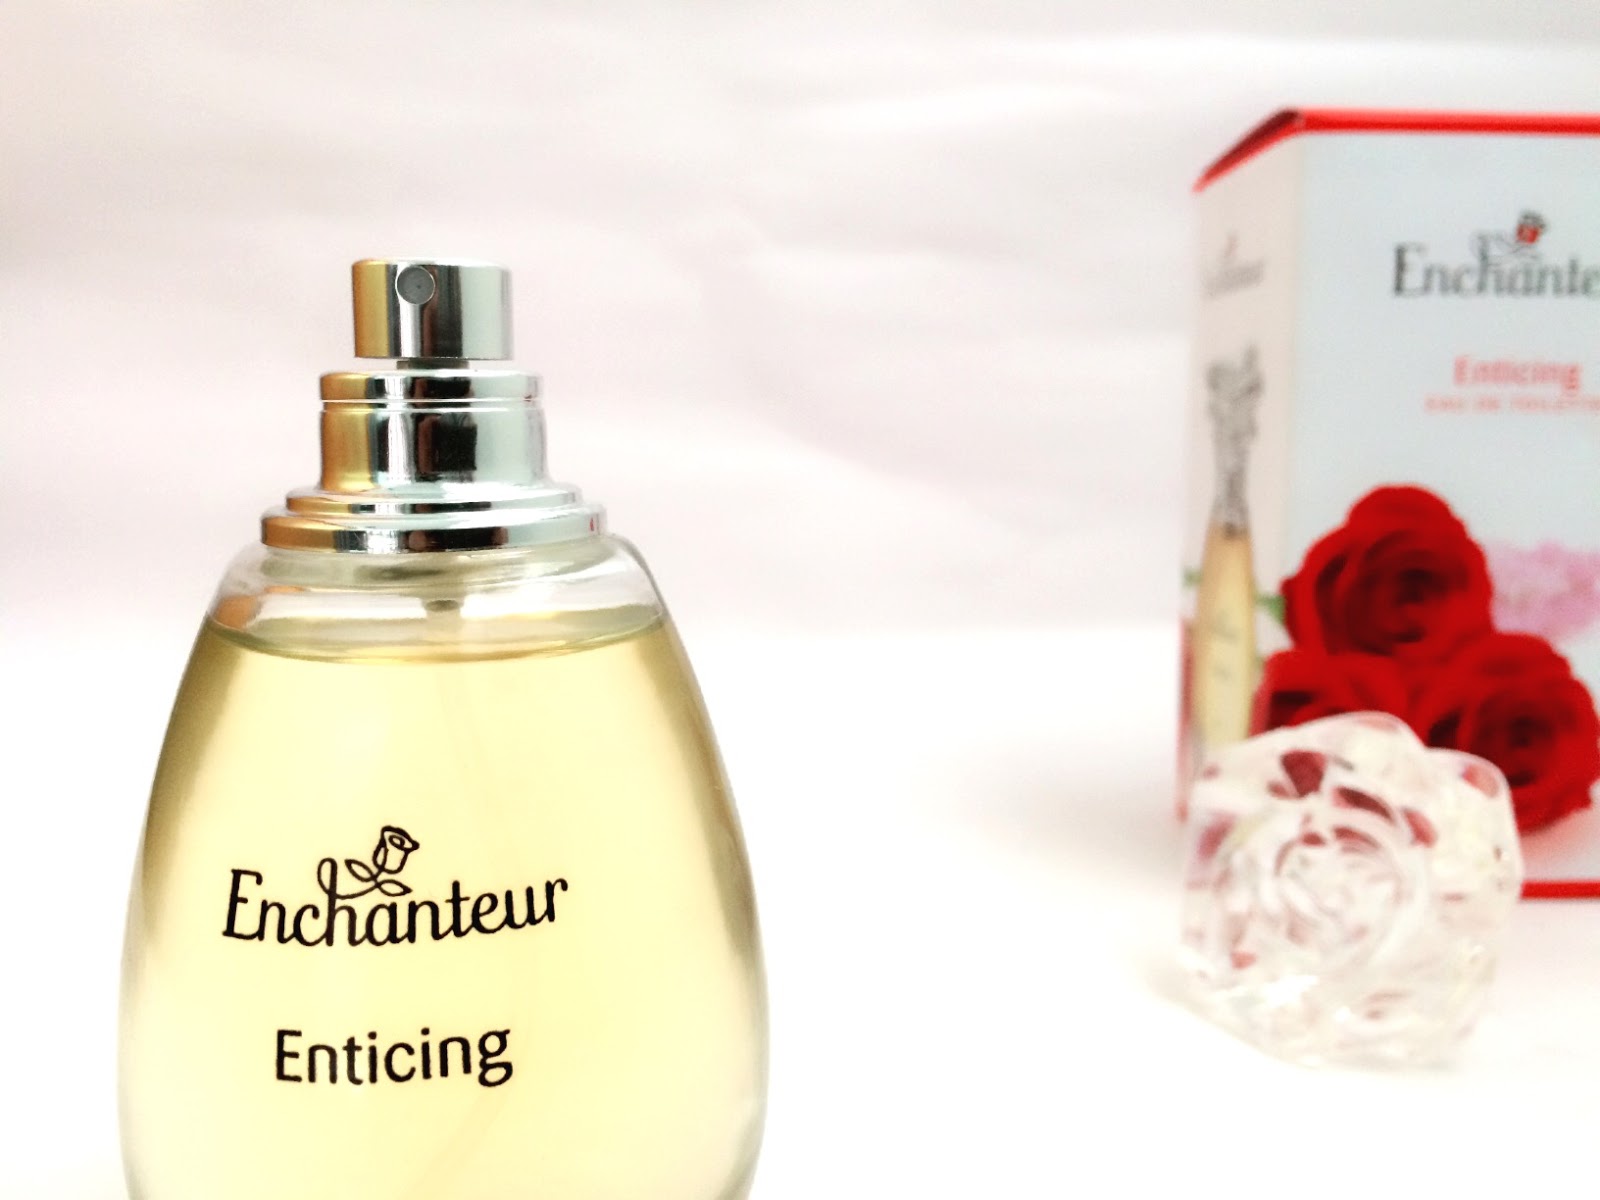 Enchanteur Enticing Perfume Review | Candy Crow | Top Indian Beauty ...